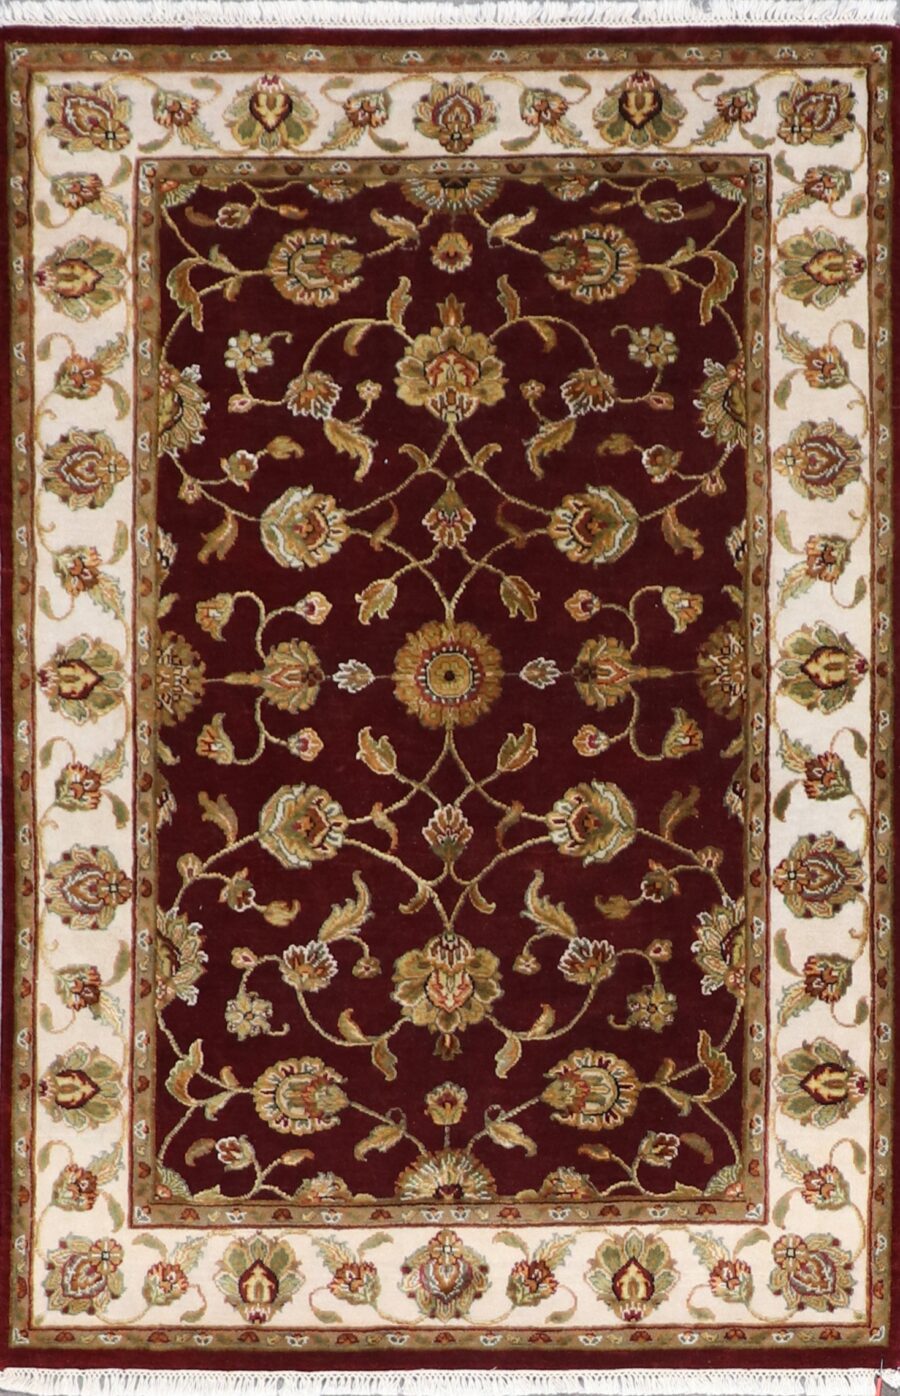 4'x6'2" Traditional Dark Red and Gold Wool &Silk Hand-Knotted Rug - Direct Rug Import | Rugs in Chicago, Indiana,South Bend,Granger